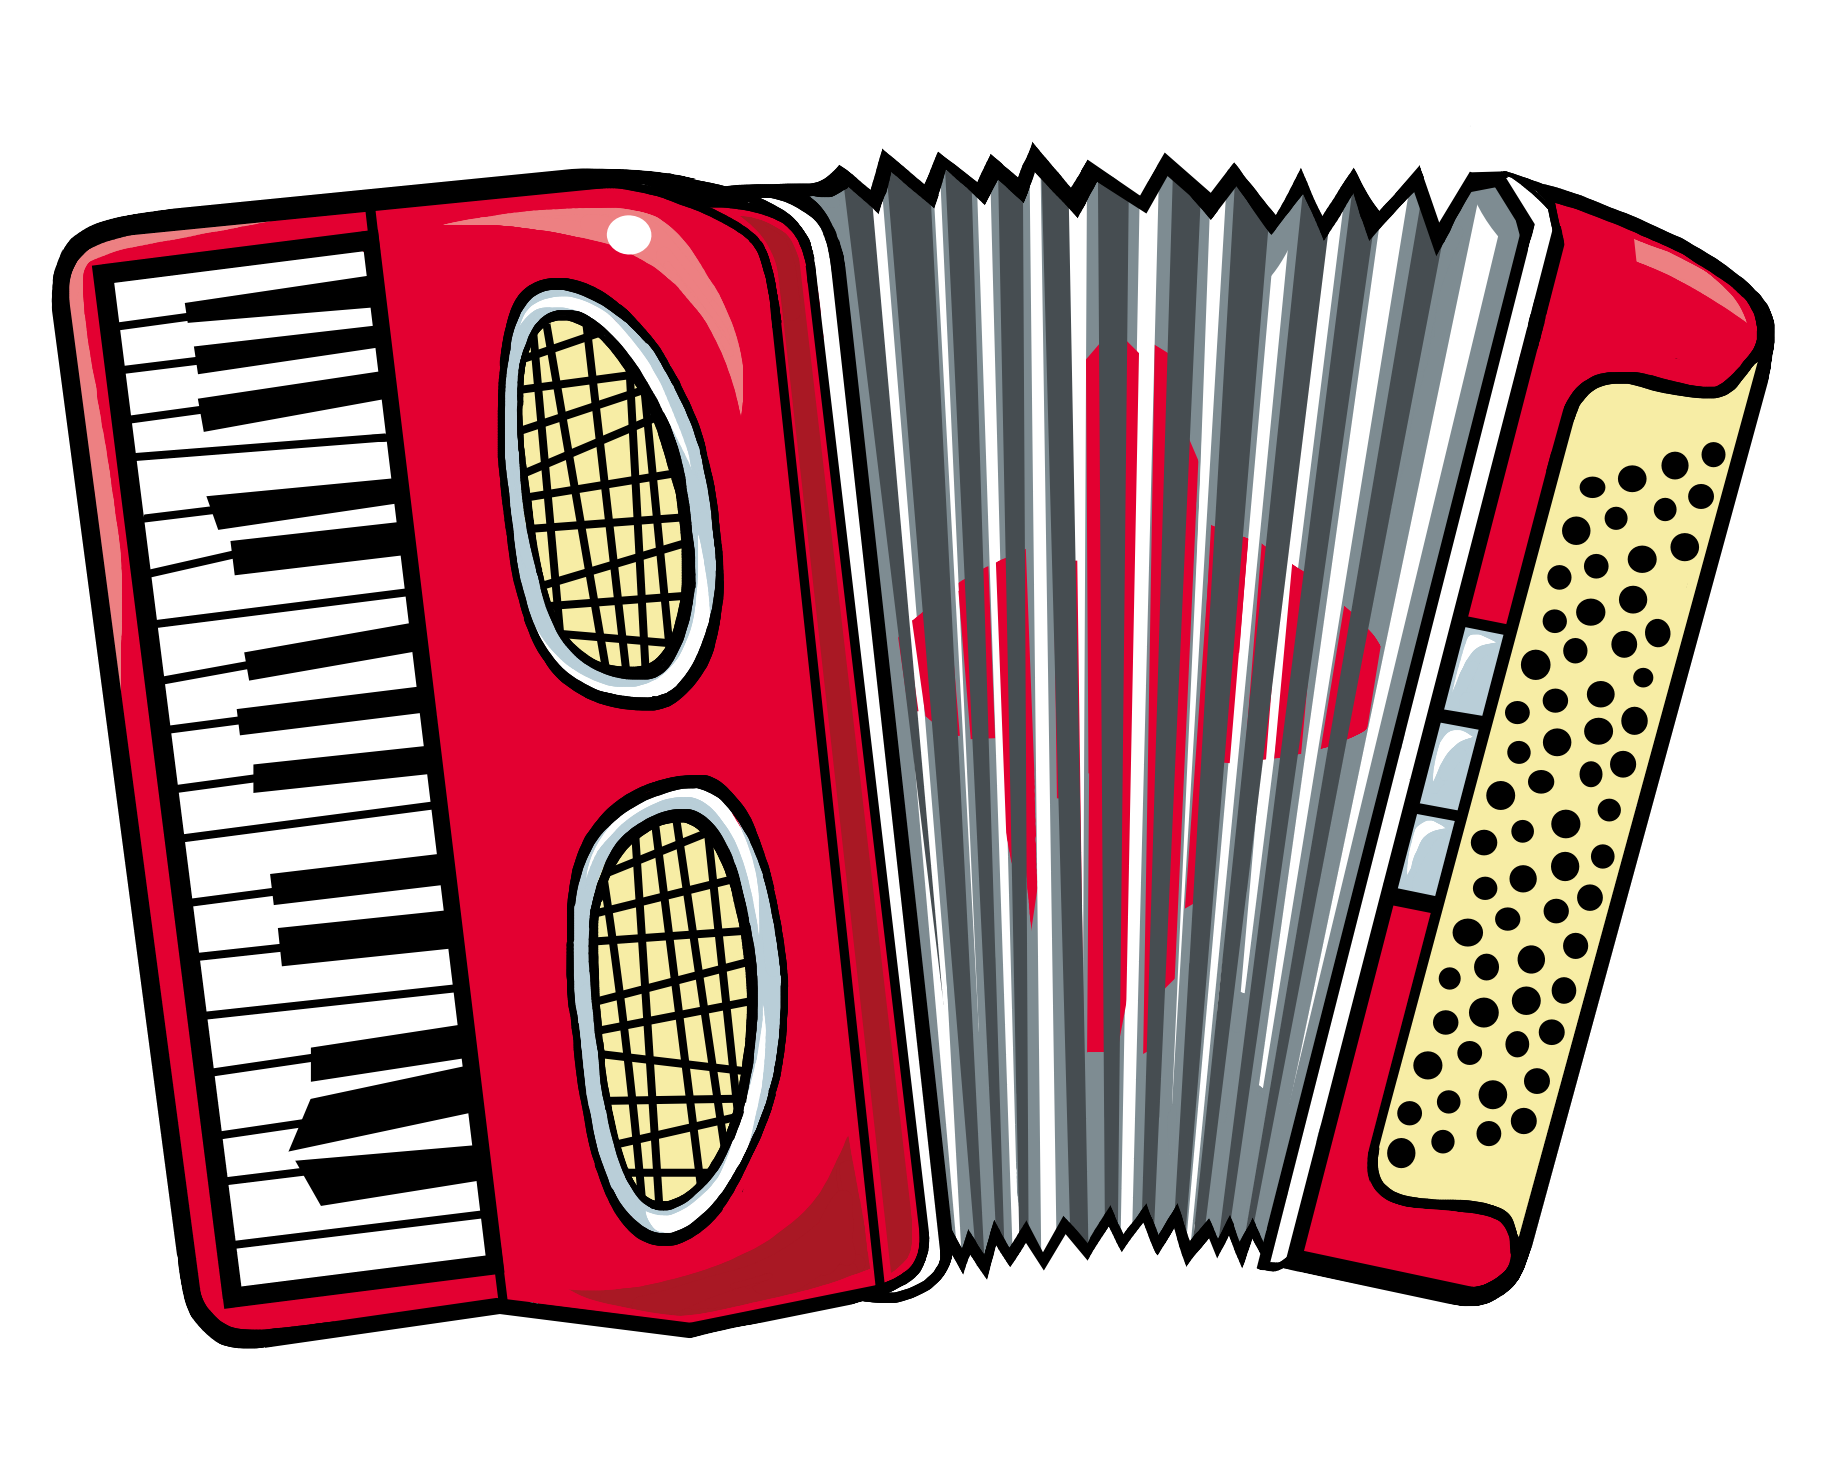 Cartoon Jeffs Accordion PNG by seanscreations1 on DeviantArt